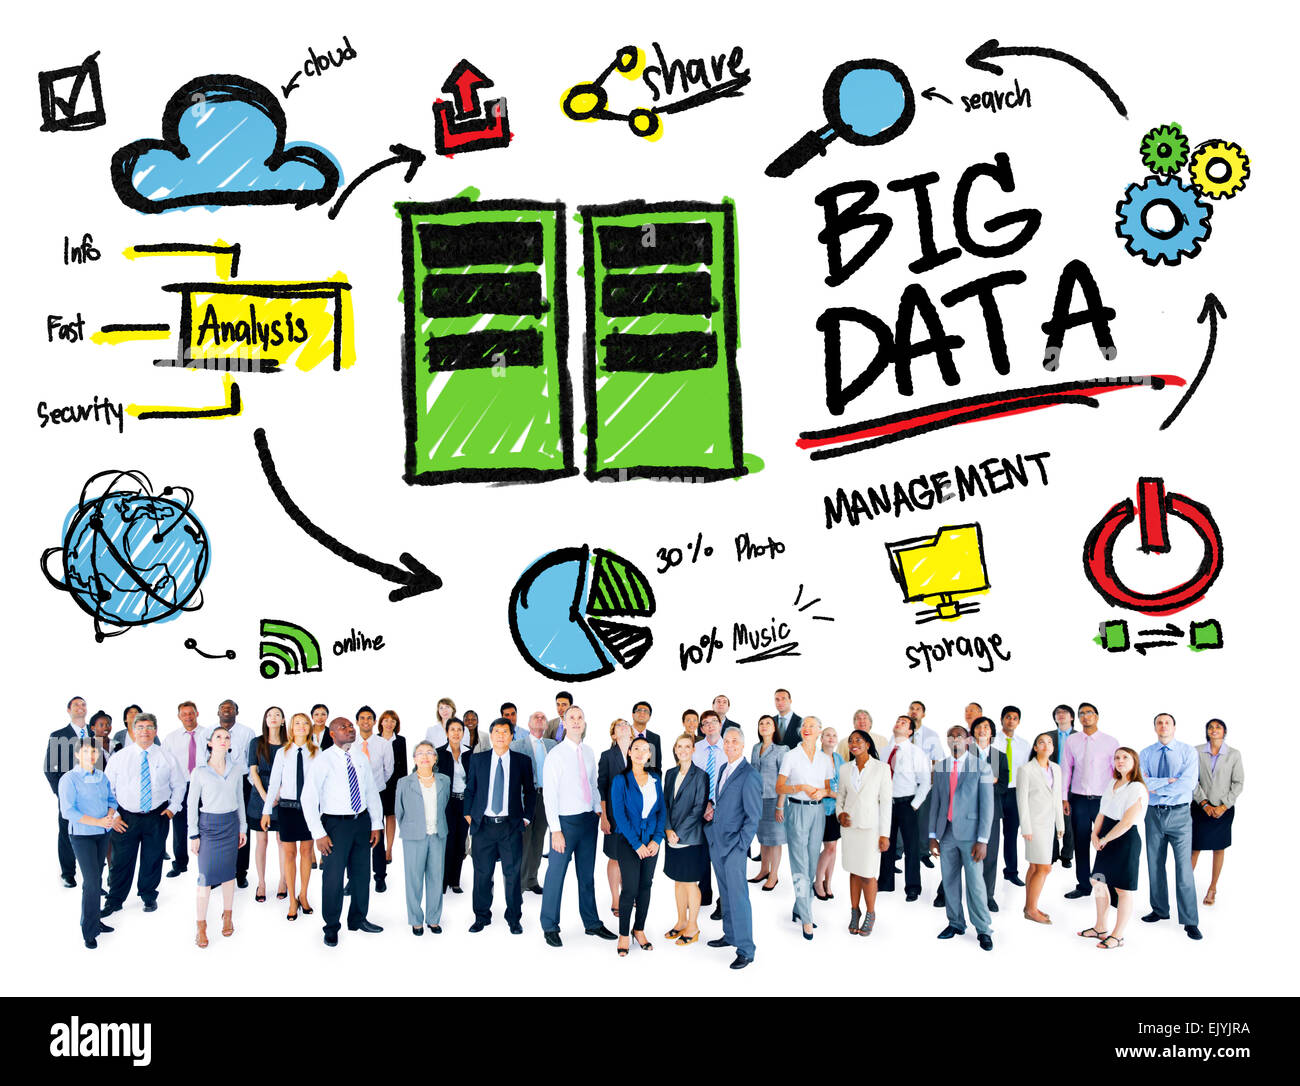 Diversity Business People Big Data Management Looking Up Concept Stock Photo